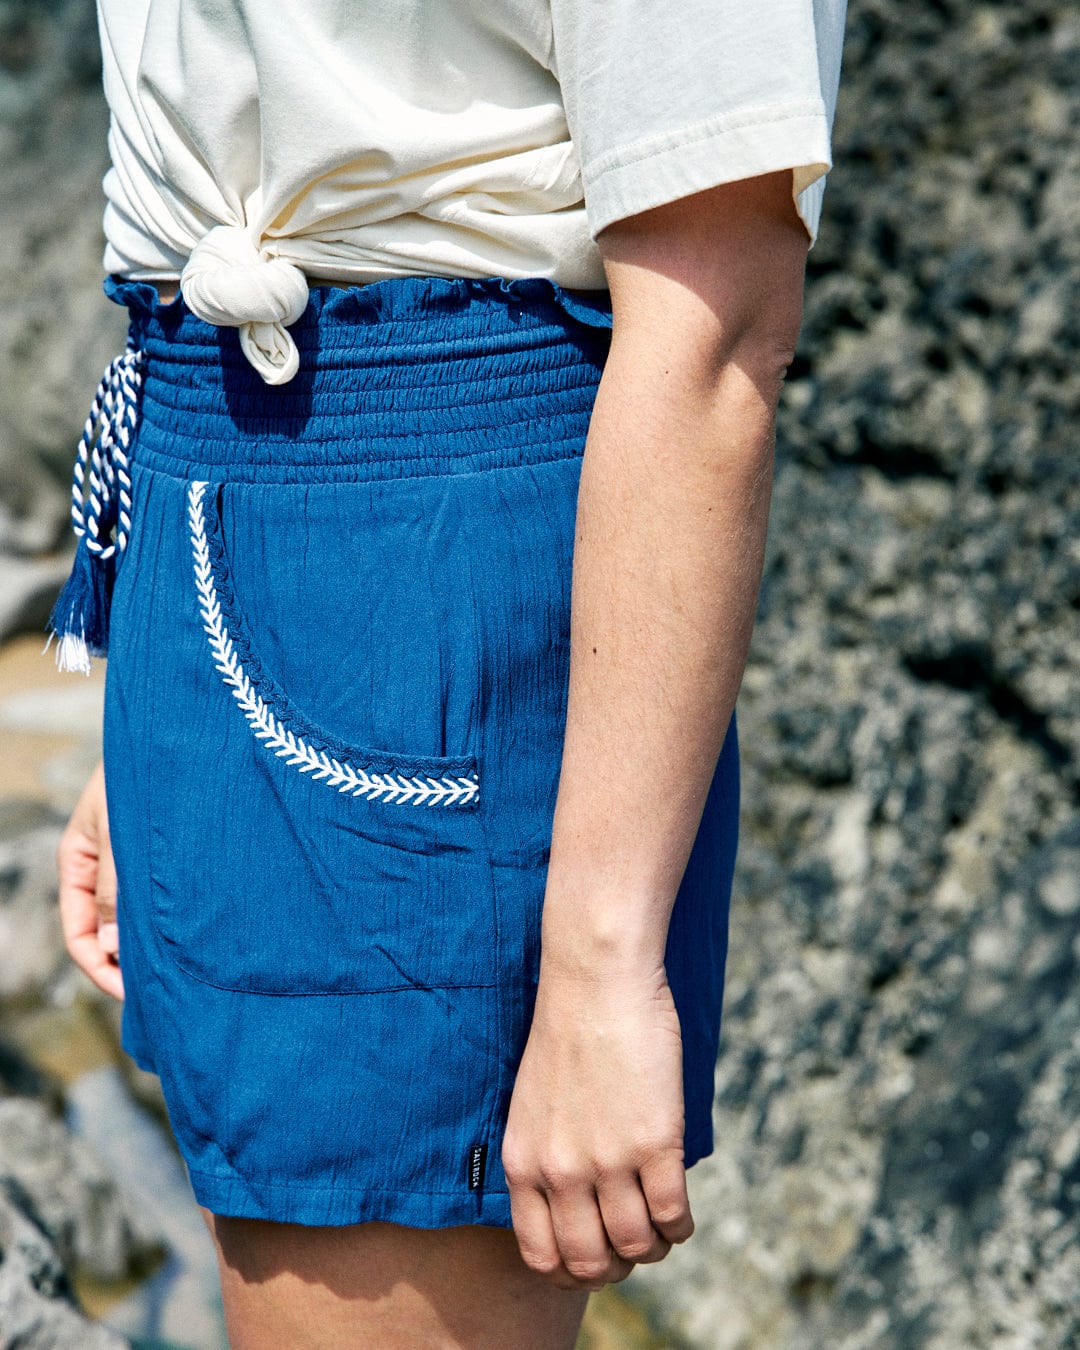 Person wearing a white T-shirt and Saltrock Jonie - Womens Shorts - Blue with an embroidered edging on the patterned pocket, standing outdoors near rocky terrain.